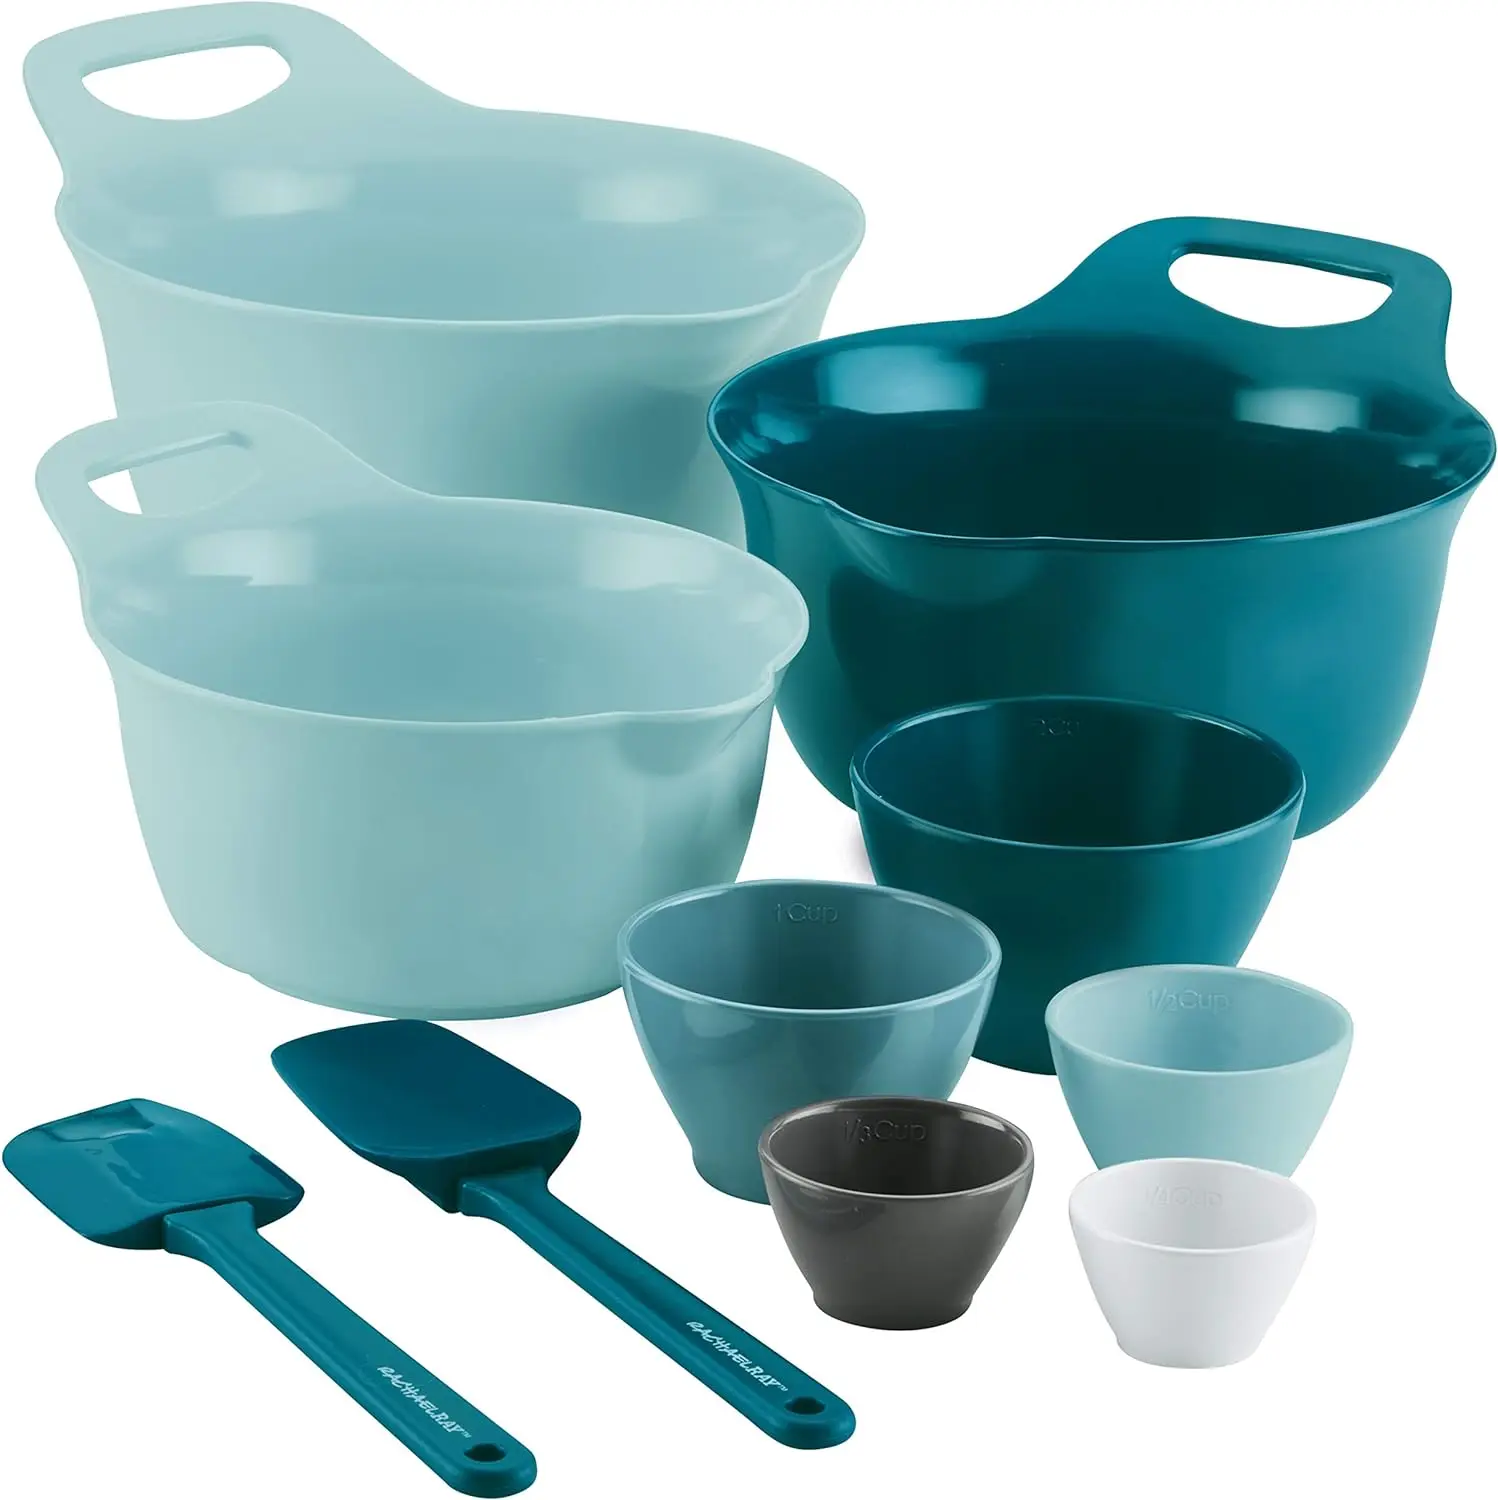 

and Gadgets and Measure Cooking / Baking Prep Set with Mixing Bowls, Measuring Cups, and Tools - 10 Piece, Light Blue and Teal